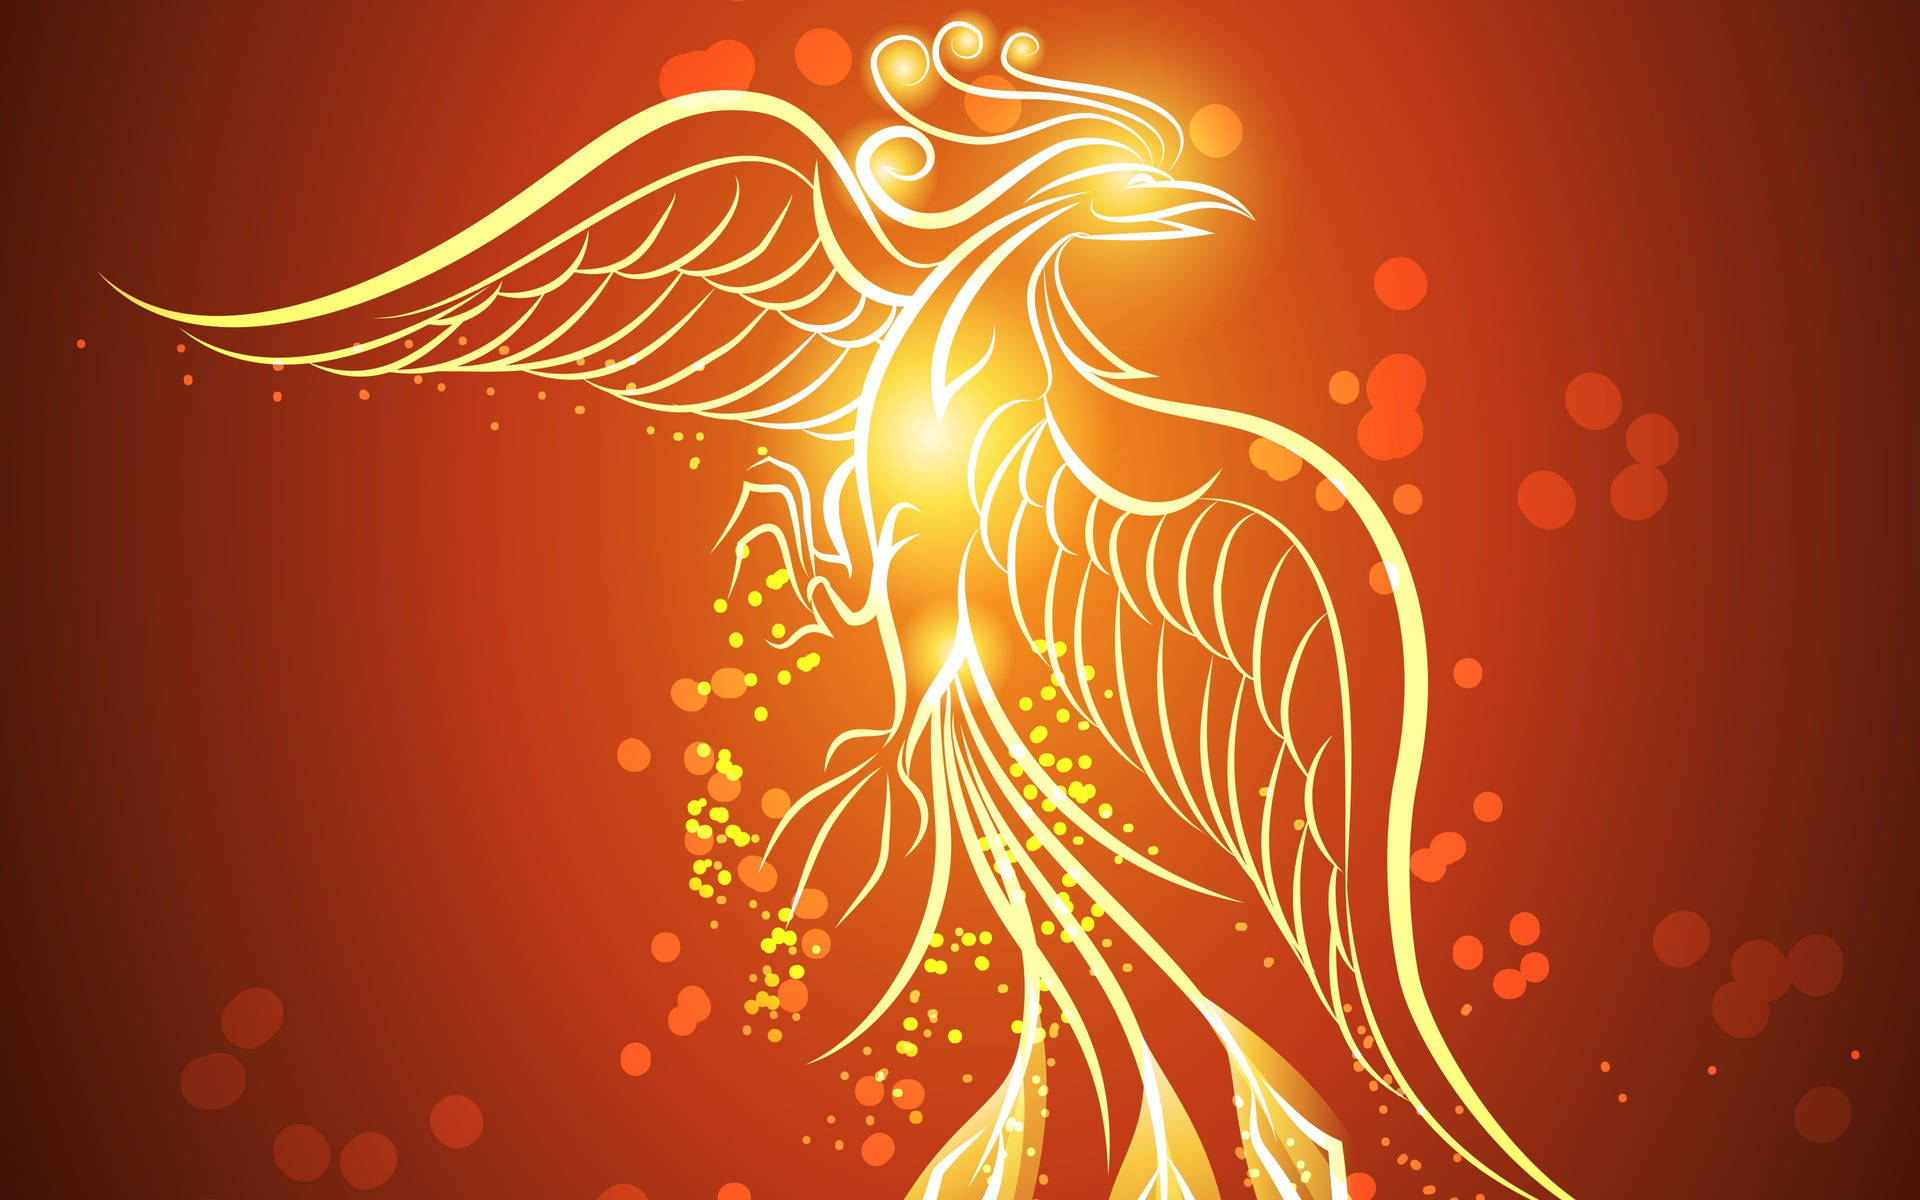 Rising Phoenix 3d Abstract Background